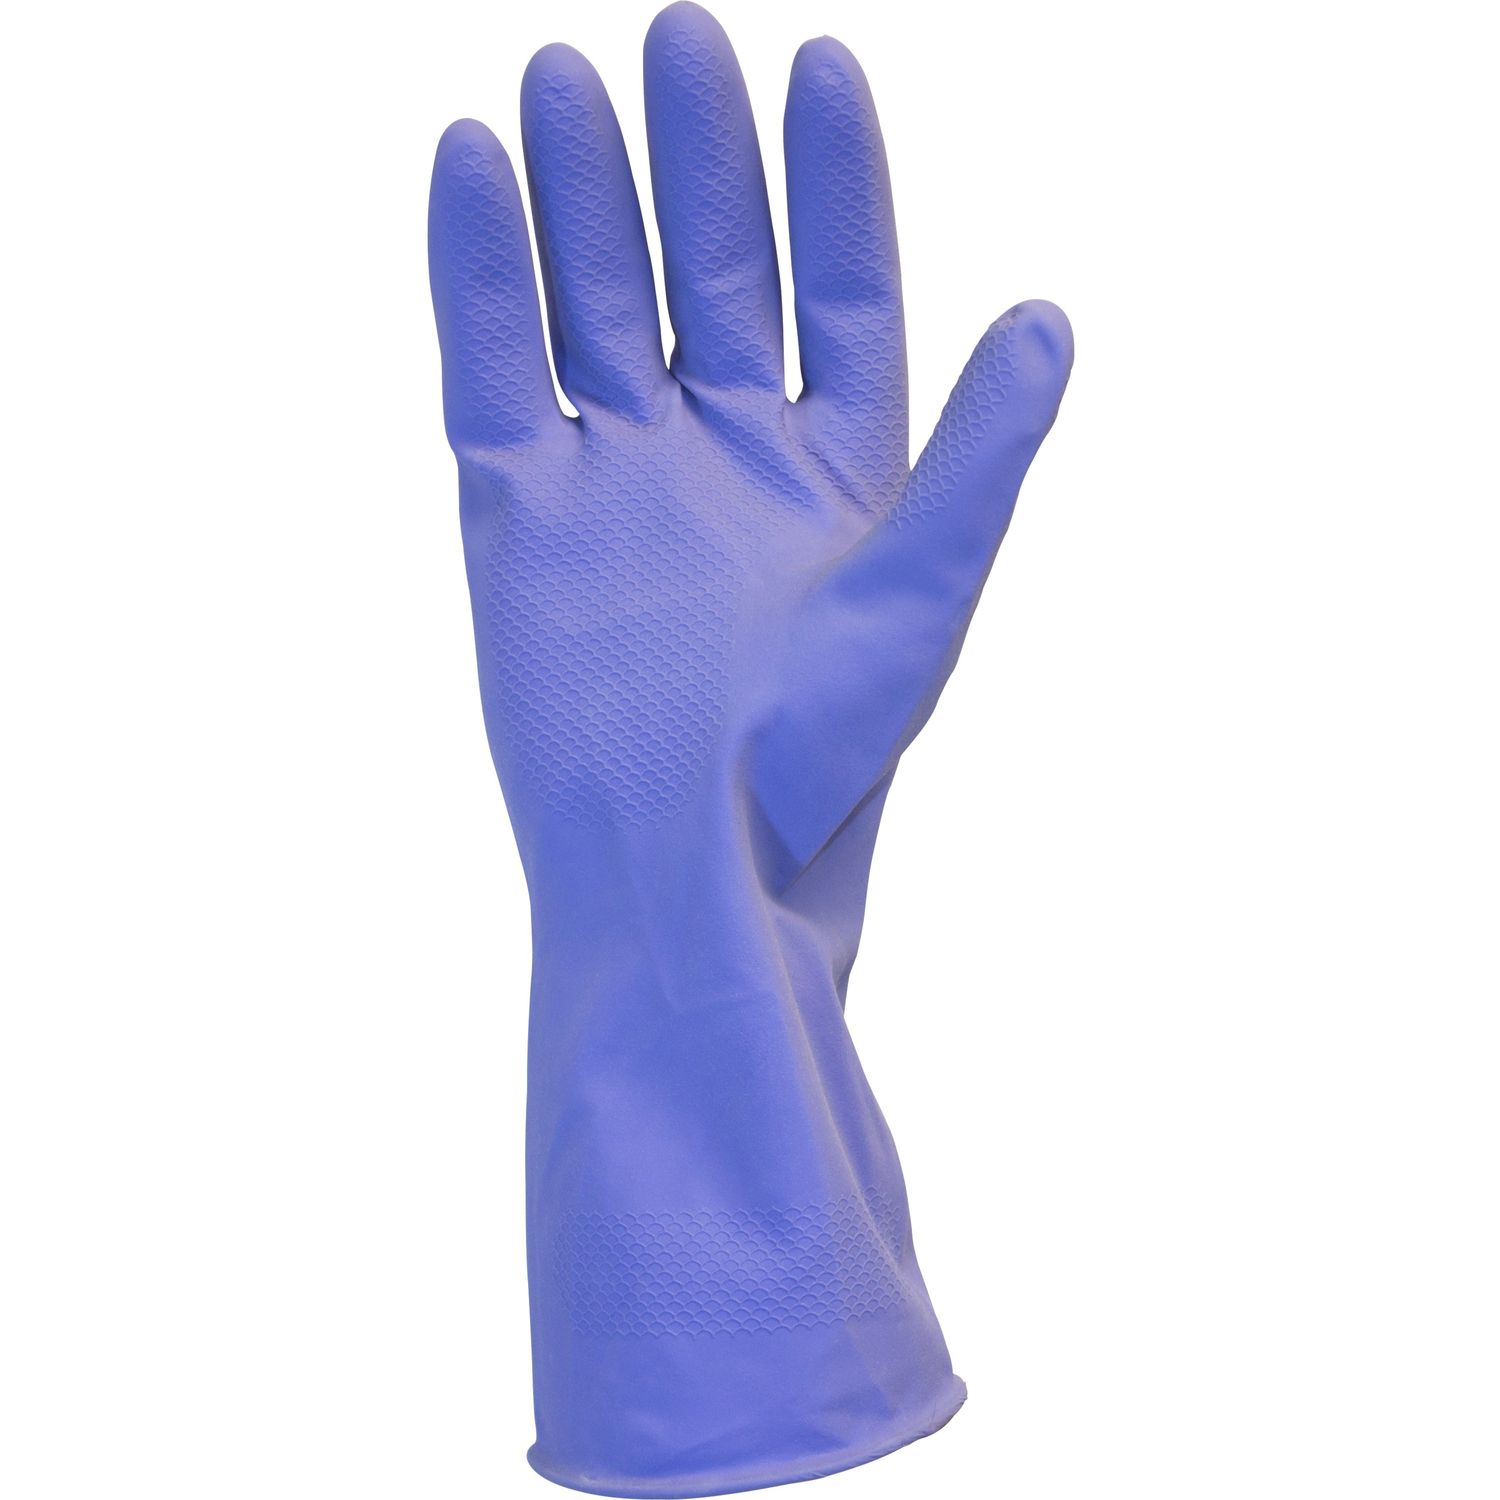 Purple Flock Lined Latex Gloves Chemical Protection, Small Size, Latex, Purple, Rolled Cuff, Fish Scale Grip, Flock-lined, For Dishwashing, Cleaning, Meat Processing, 16 mil Thickness